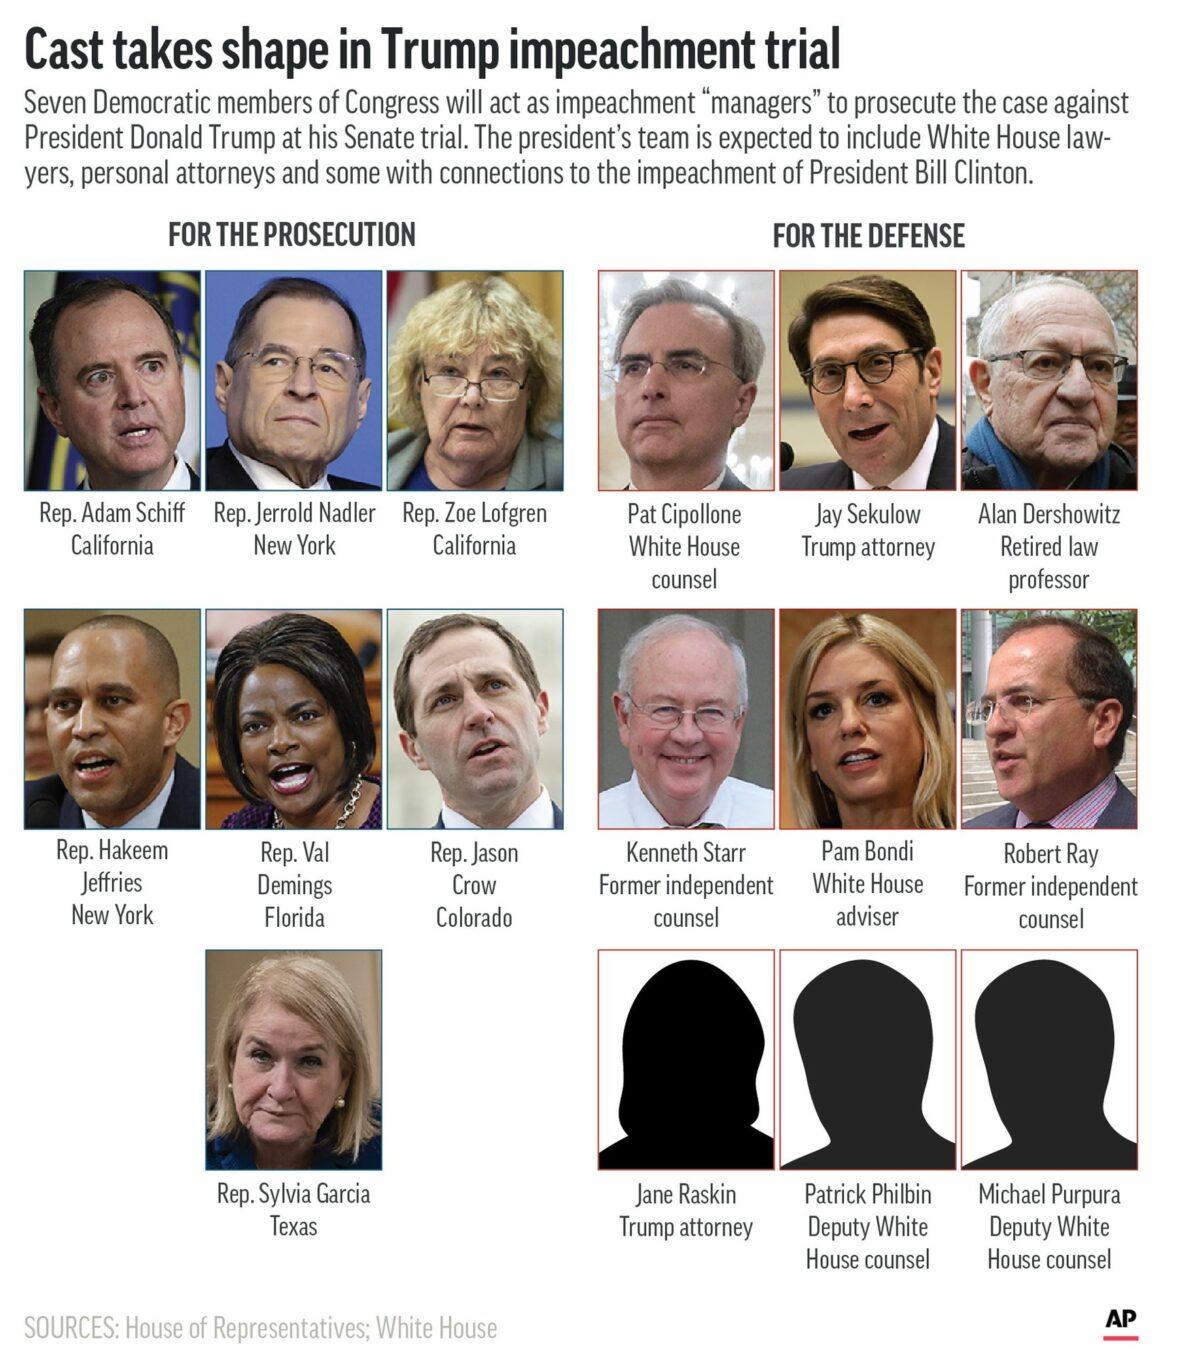 Teams for the prosecution and defense in the impeachment trial of President Donald Trump. (AP Graphic)